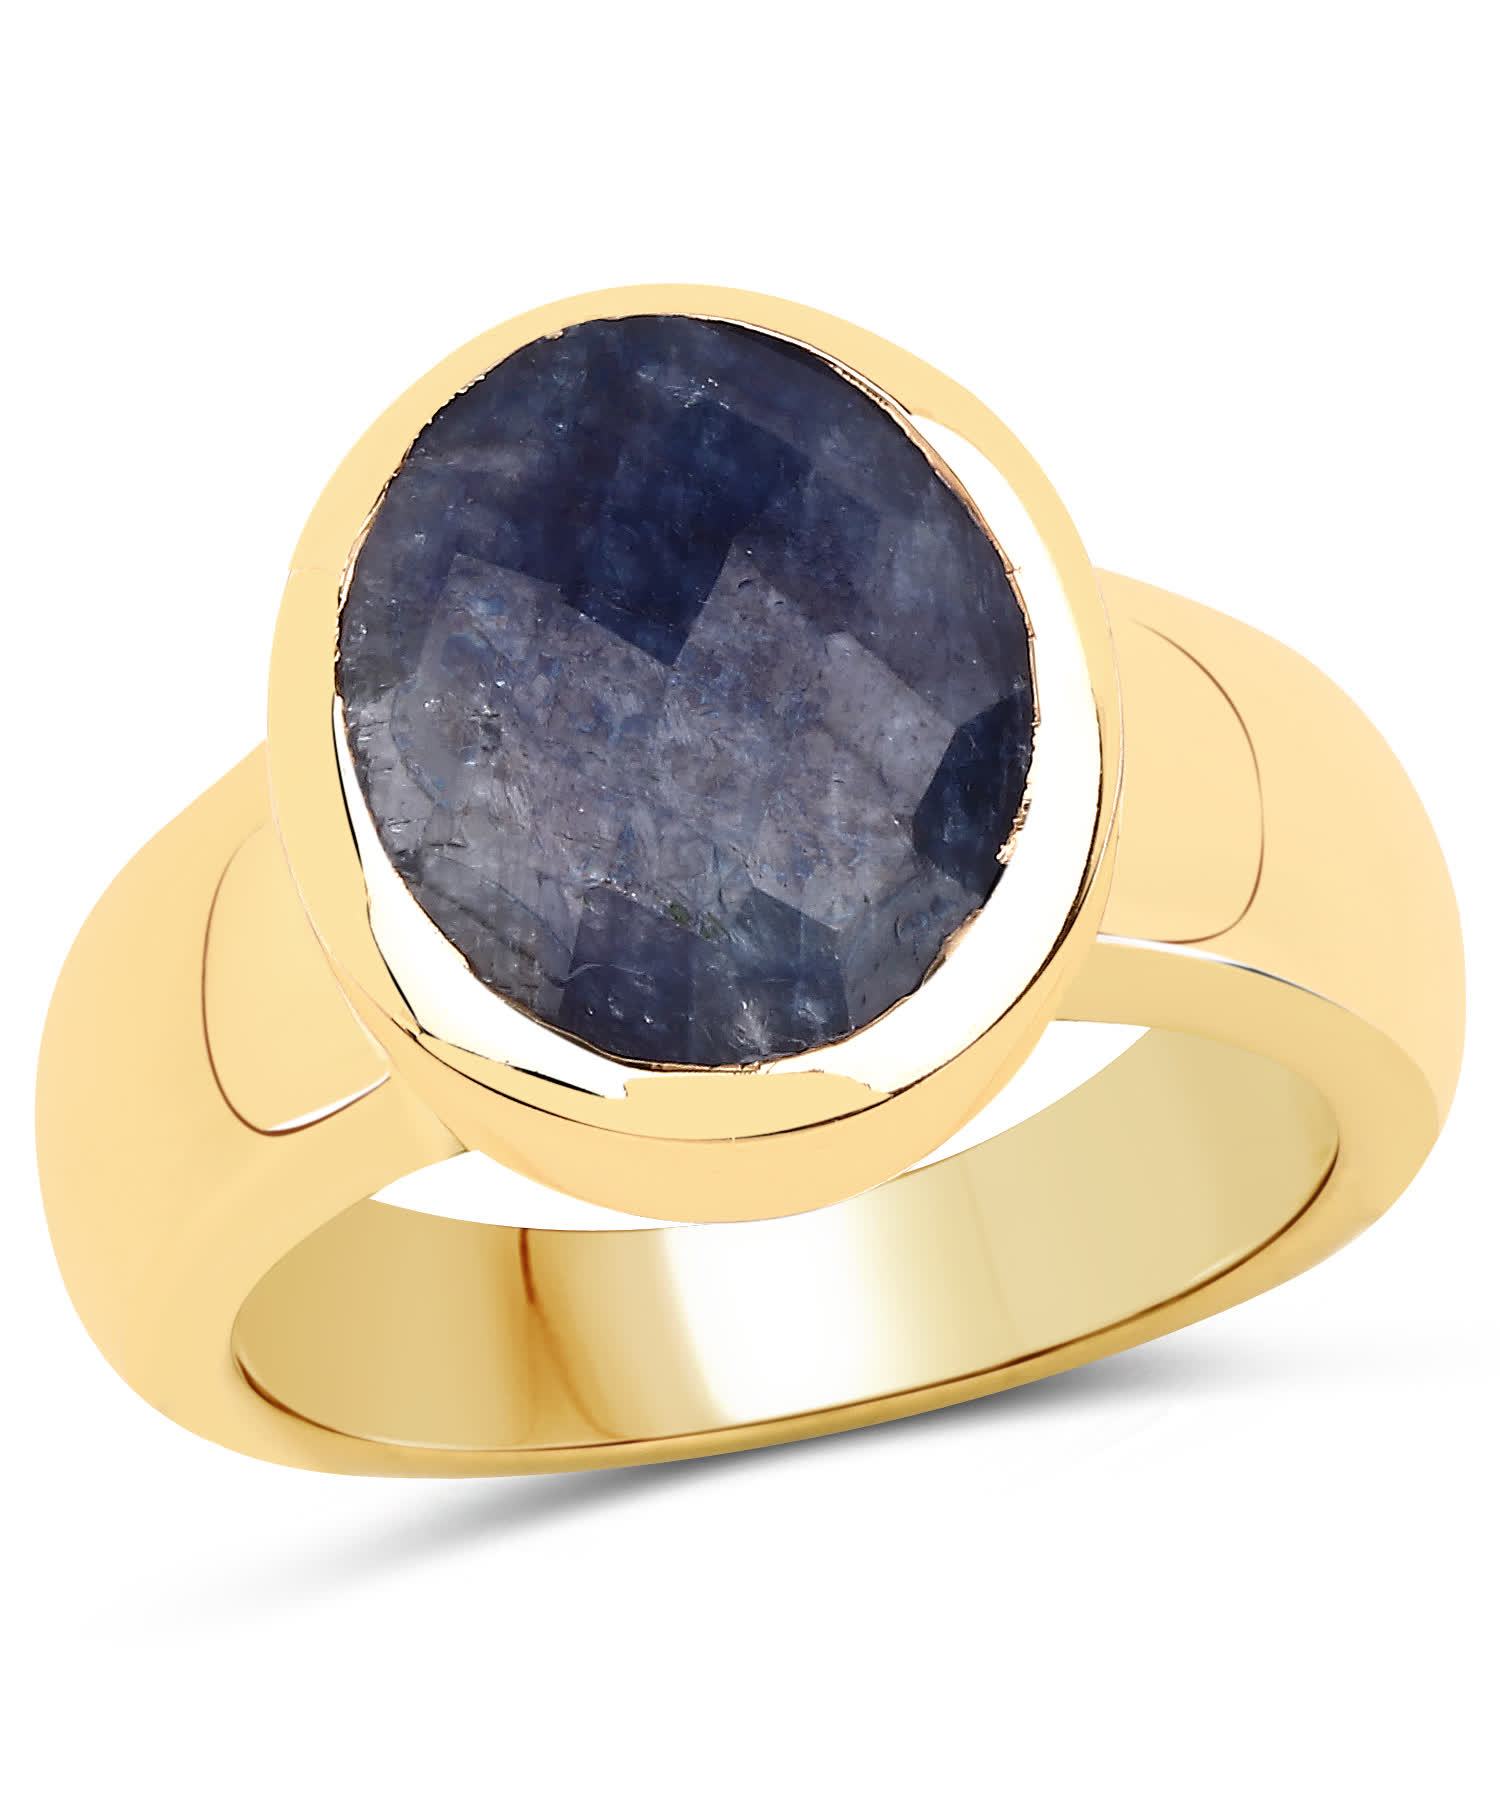 5.25ctw Natural Midnight Blue Sapphire 14k Gold Plated Ring View 1